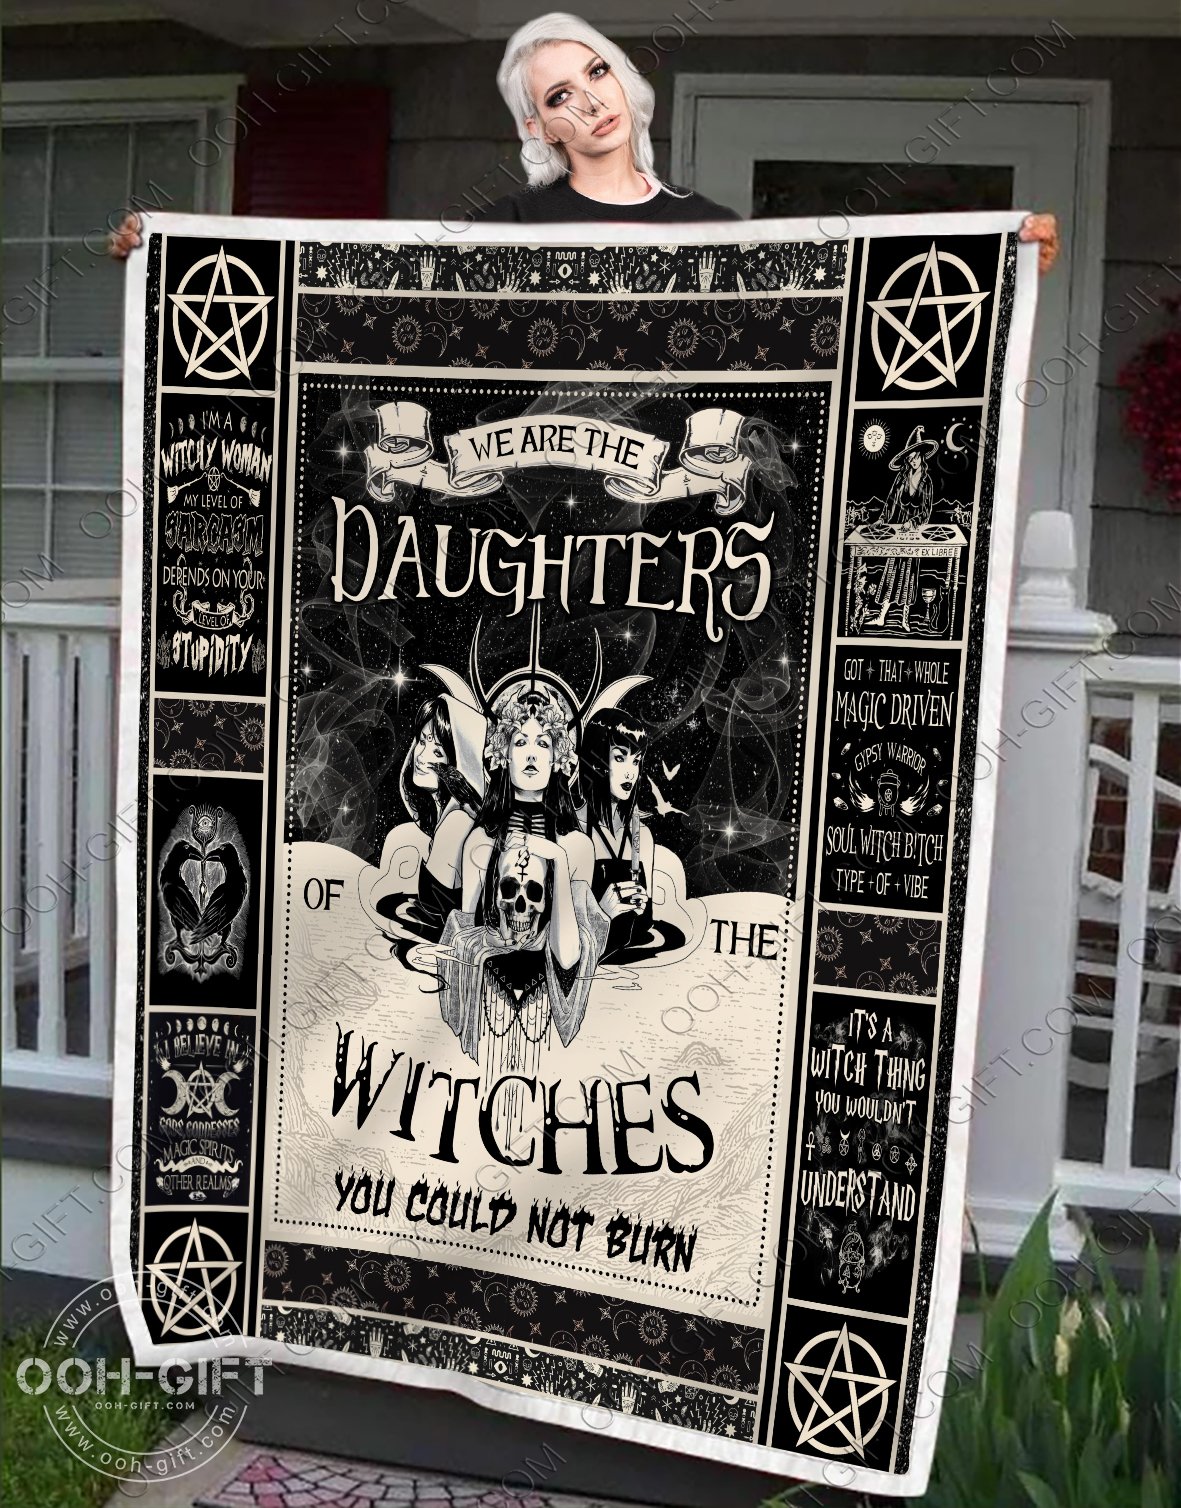 We are the daughters of the witches you could not burn blanket 2